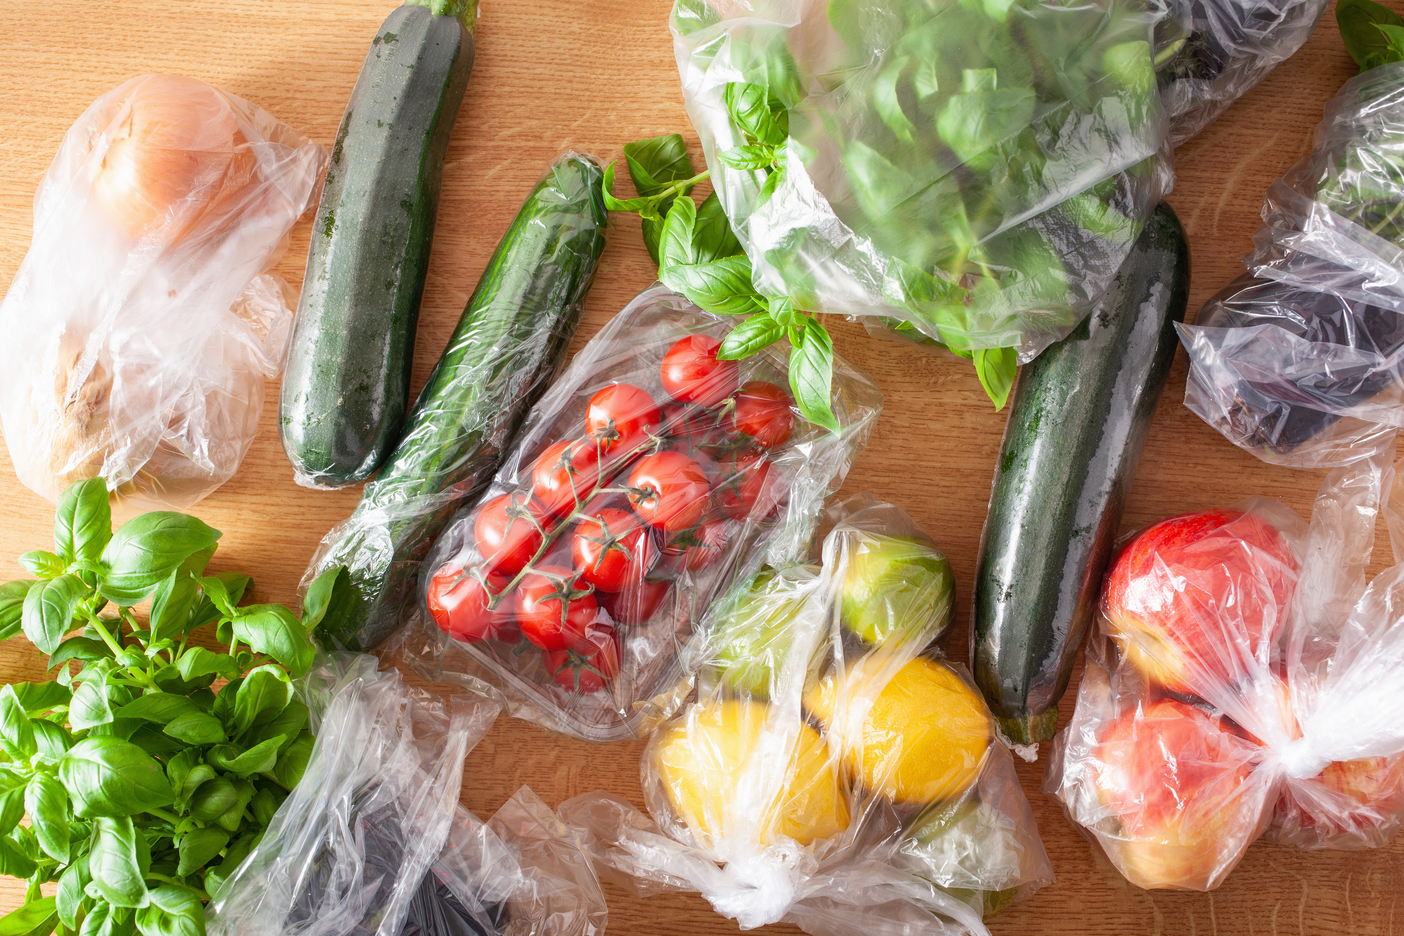 single use plastic packaging issue. fruits and vegetables in plastic bags